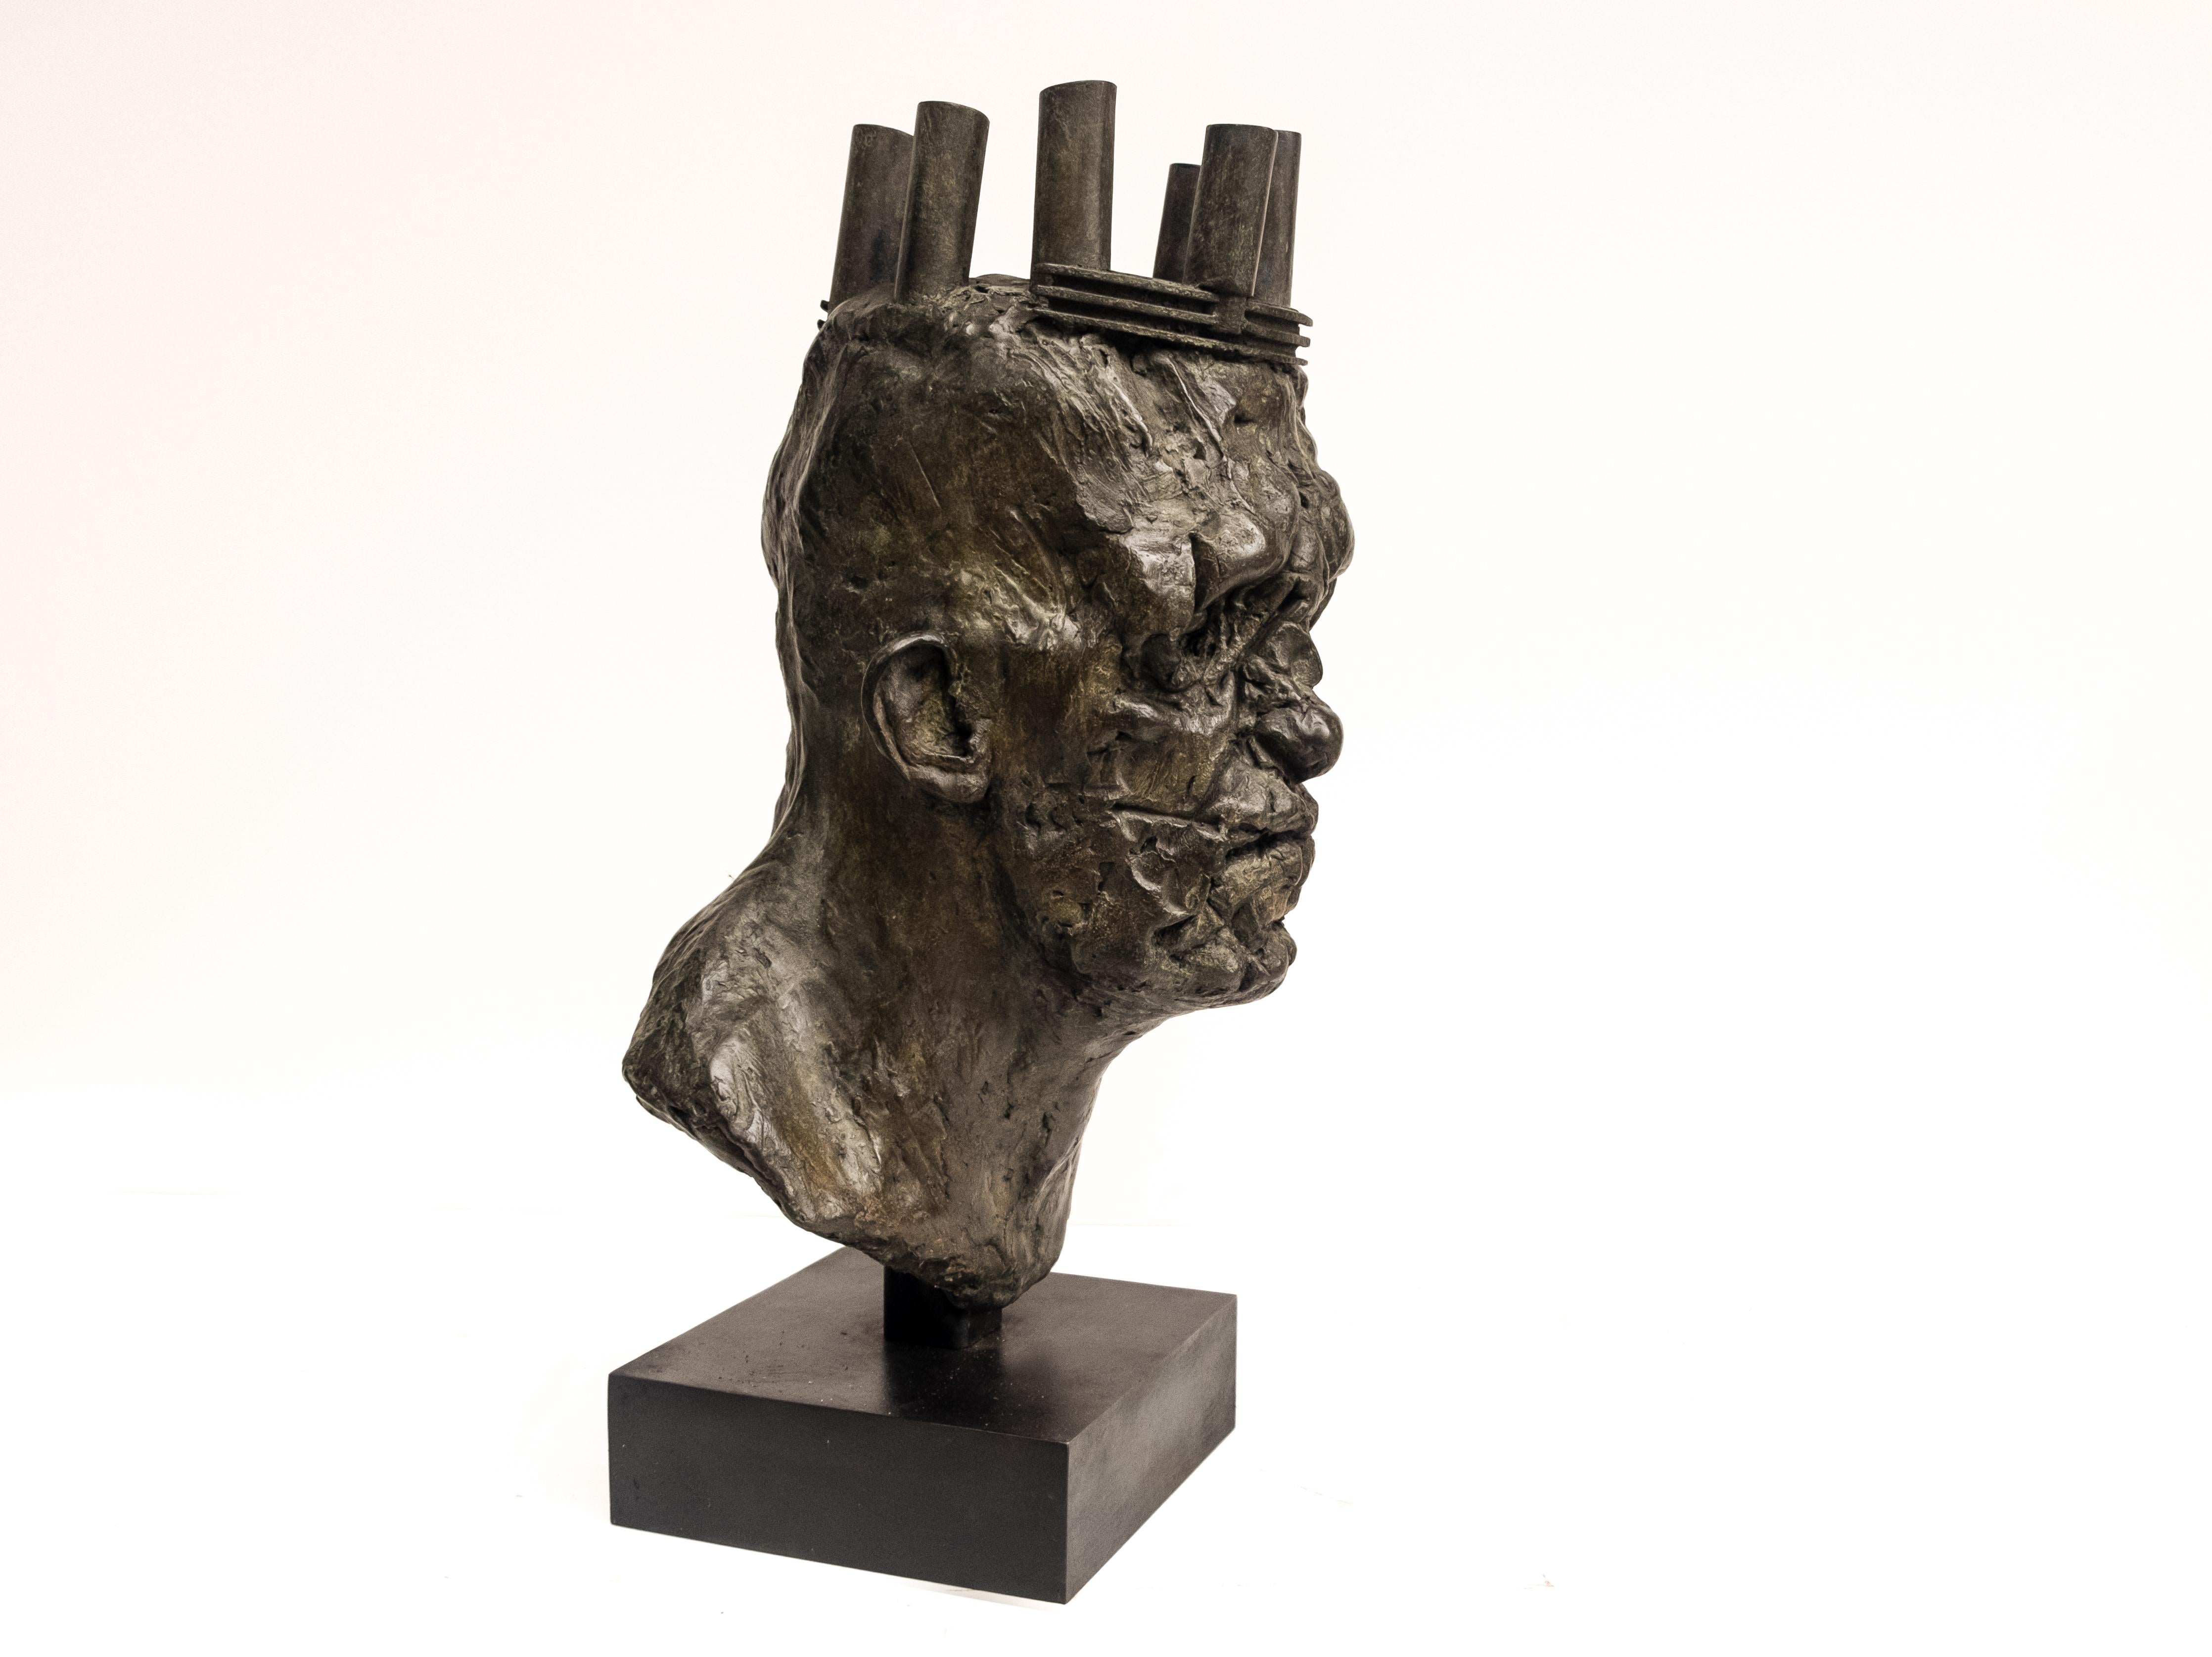 Hollow King - Sculpture by Beth Carter